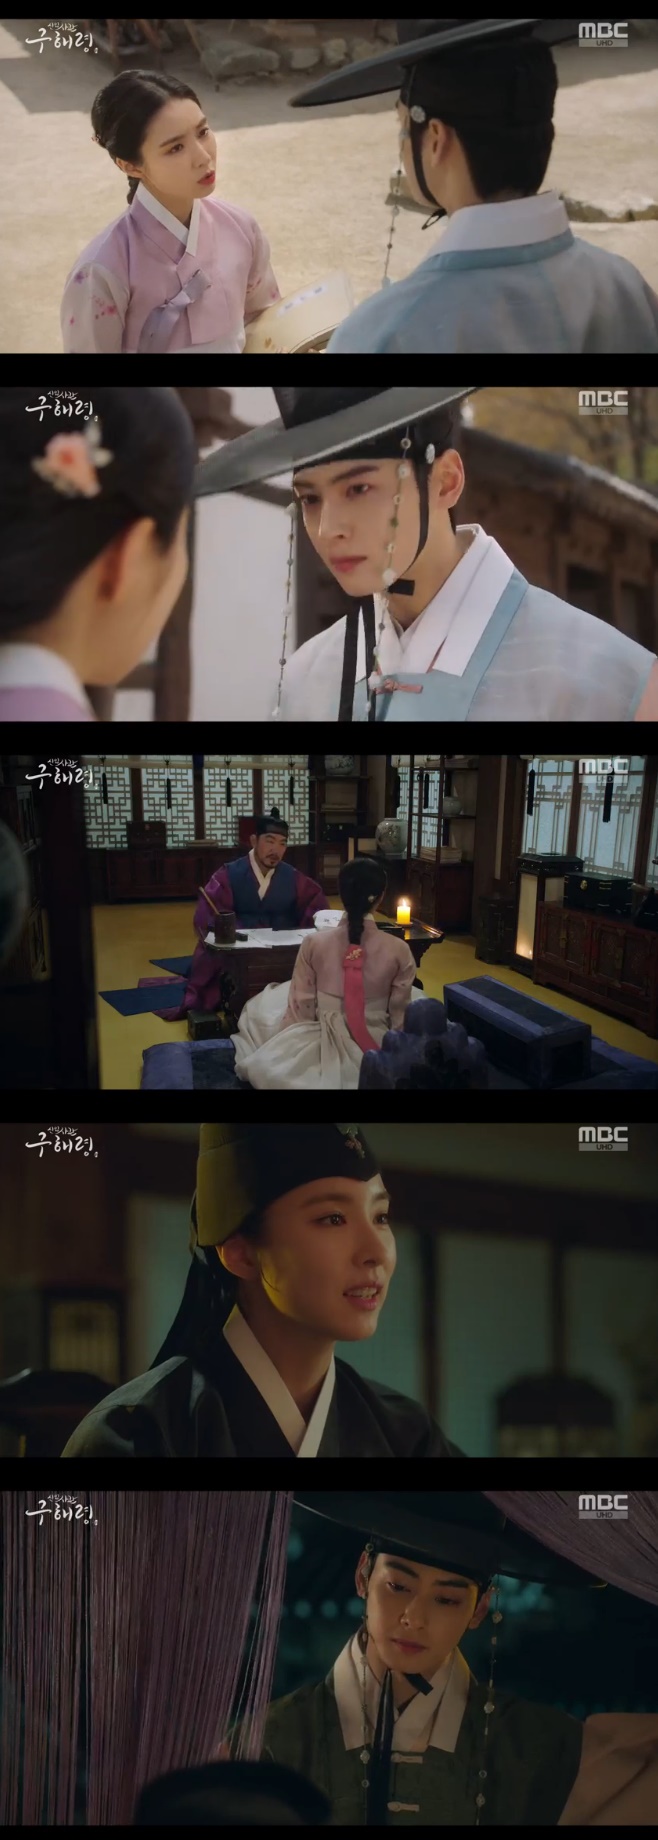 The new recruits, Na Hae-ryung Shin Se-kyung and Jung Eun-woo, were involved in a bad relationship from their first meeting.In the MBC new drama Na Hae-ryung (played by Kim Ho-soo and directed by Kang Il-soo), which was first broadcast on the 17th, Na Hae-ryung told his brother, I do not want to take a new class.I dont want to marry her, he said.You cant have fun with your brother, if youre reading books all day, if youre curious, and if youre having a little fun with him, said Na Hae-ryung.But his brother had asked him to find the right Jiabi to avoid rushing him to go, and then he was ordered to remove it, saying that a bad book was going around in the city.Then the Orabi of Na Hae-ryung hurried to marry Na Hae-ryung.Prince Irim (Jung Eun-woo), a mother-of-one, had a double life with a popular love-fiction novel, Plum; he wanted to go out of the palace and check his reaction to his novel.The crown prince, Lee Jin (Park Ki-woong), who was in the first rank of succession to the throne, found Irim, who was trying to sneak out, and allowed him to leave the palace.Lee, who visited Heavens Bookstore, saw the people who enjoyed his book and smiled.He saw Na Hae-ryung in the Heavens Bookstore and approached him at first sight.But Na Hae-ryung yawned at Irims book, and Na Hae-ryung explained one by one to Irim, who wondered why plums were not good.If you have a human conscience that makes money and you write this, you have to make a desperate effort, said Na Hae-ryung, and left first.Lee Rim followed Na Hae-ryung, who said, It is called the anxiety of the eye dog.The reason you do not like the novel of plum is because you do not know beauty. There is a saying that there is no stitching in the clothes of a good girl, said Na Hae-ryung.The more you are suspicious of her, the more reasonable you are, he said, and left without hesitation. I think she is a plum.Meanwhile, Koo Hae-ryung tried to save the boy who had picked up his stuff earlier from suffering from a wicked boss (Lee Jong-hyuk).But the boy was forced to confirm that he had been sold to Skyla Novea by the boss and send him.The hawks planned to make a fortune using plums; those who did not find them found someone to pretend to be plums instead of plums, and offered this to the former Na Hae-ryung.Na Hae-ryung refused to do so, but decided to pretend to be a plum, accepting the condition that he would remove the childs Skyla Novea document.Later, the former Na Hae-ryung, who was posing as a plum, faced the real plum Irim at a signing meeting with readers.Lee, who had been checking his identity by lifting the cover, said, Would you write my name as plum?Na Hae-ryung hid his face straight away, and Irim was surprised that an unexpected figure was pretending to be a snatcher.